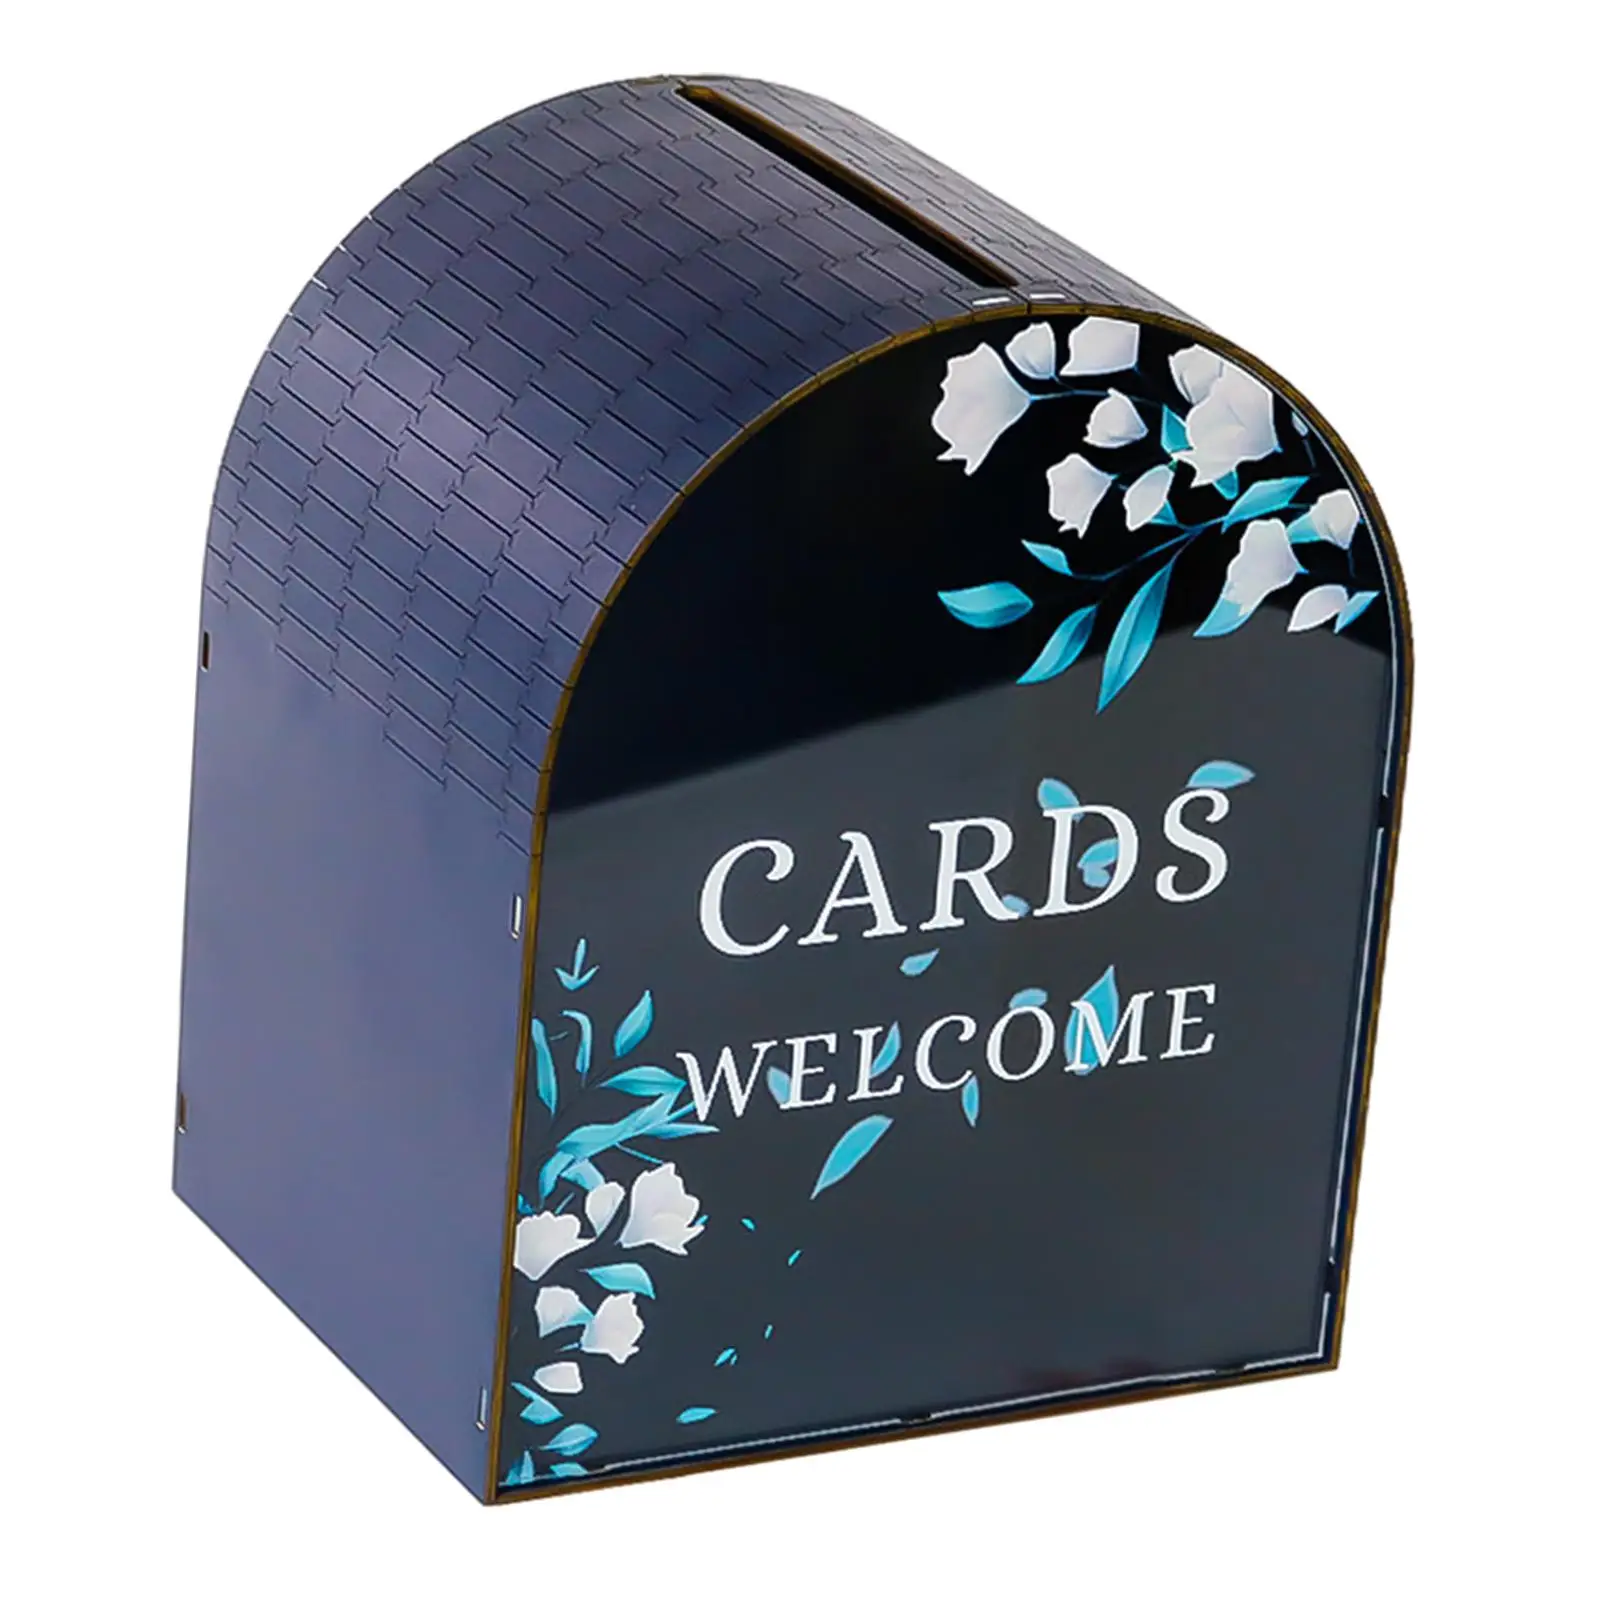 Acrylic Wedding Card Box Wishing Wells Wedding Decoration Large Gift Card Box for Parties New Year Baby Shower Birthday Events